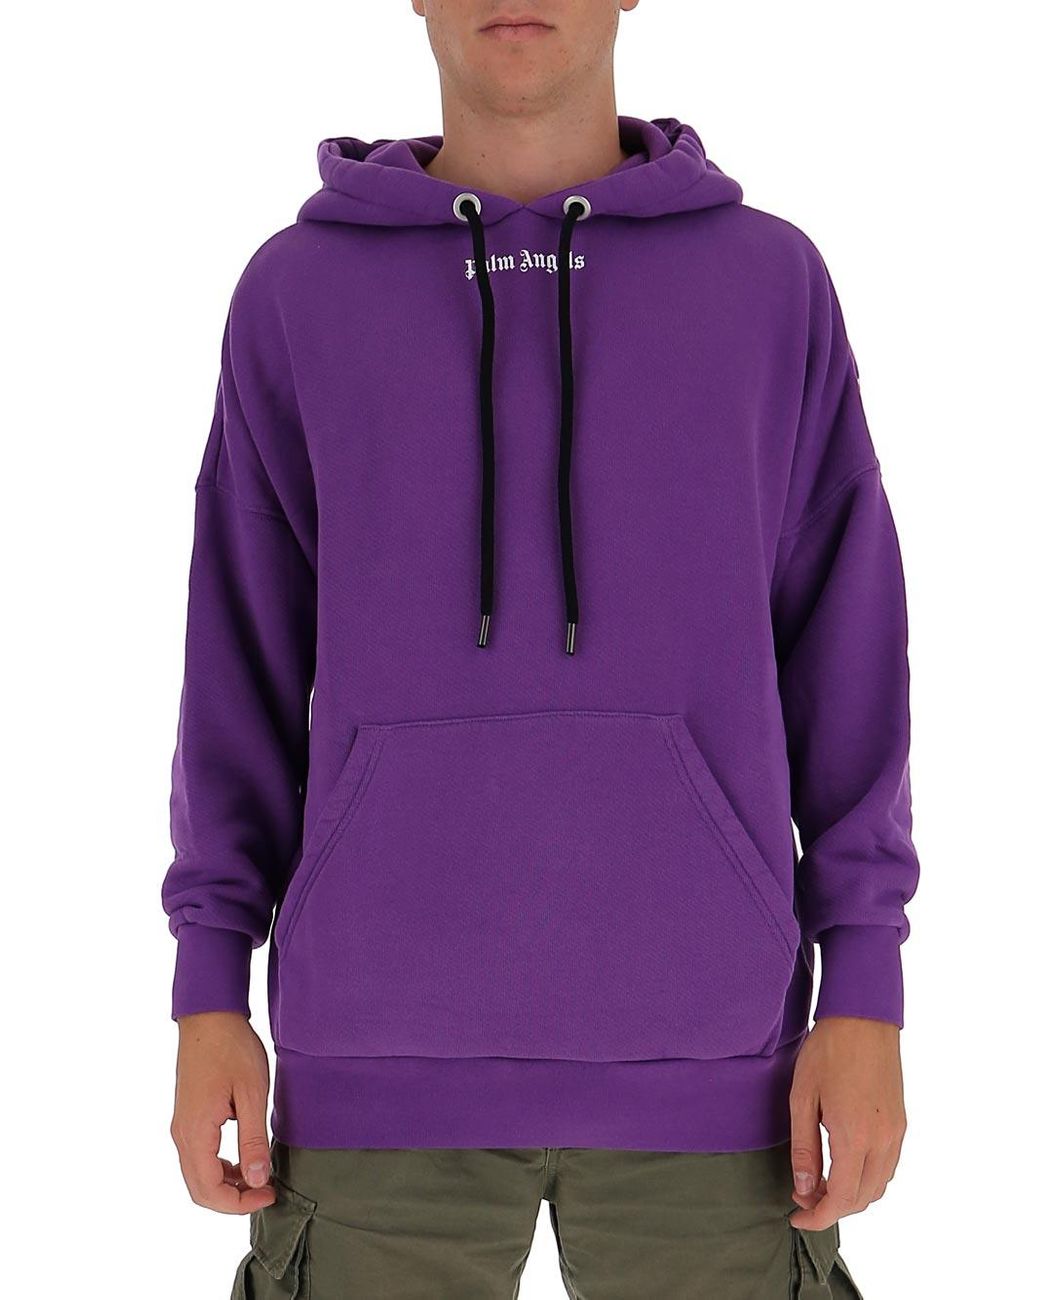 Palm Angels Cotton Logo Hoodie in Purple for Men - Lyst